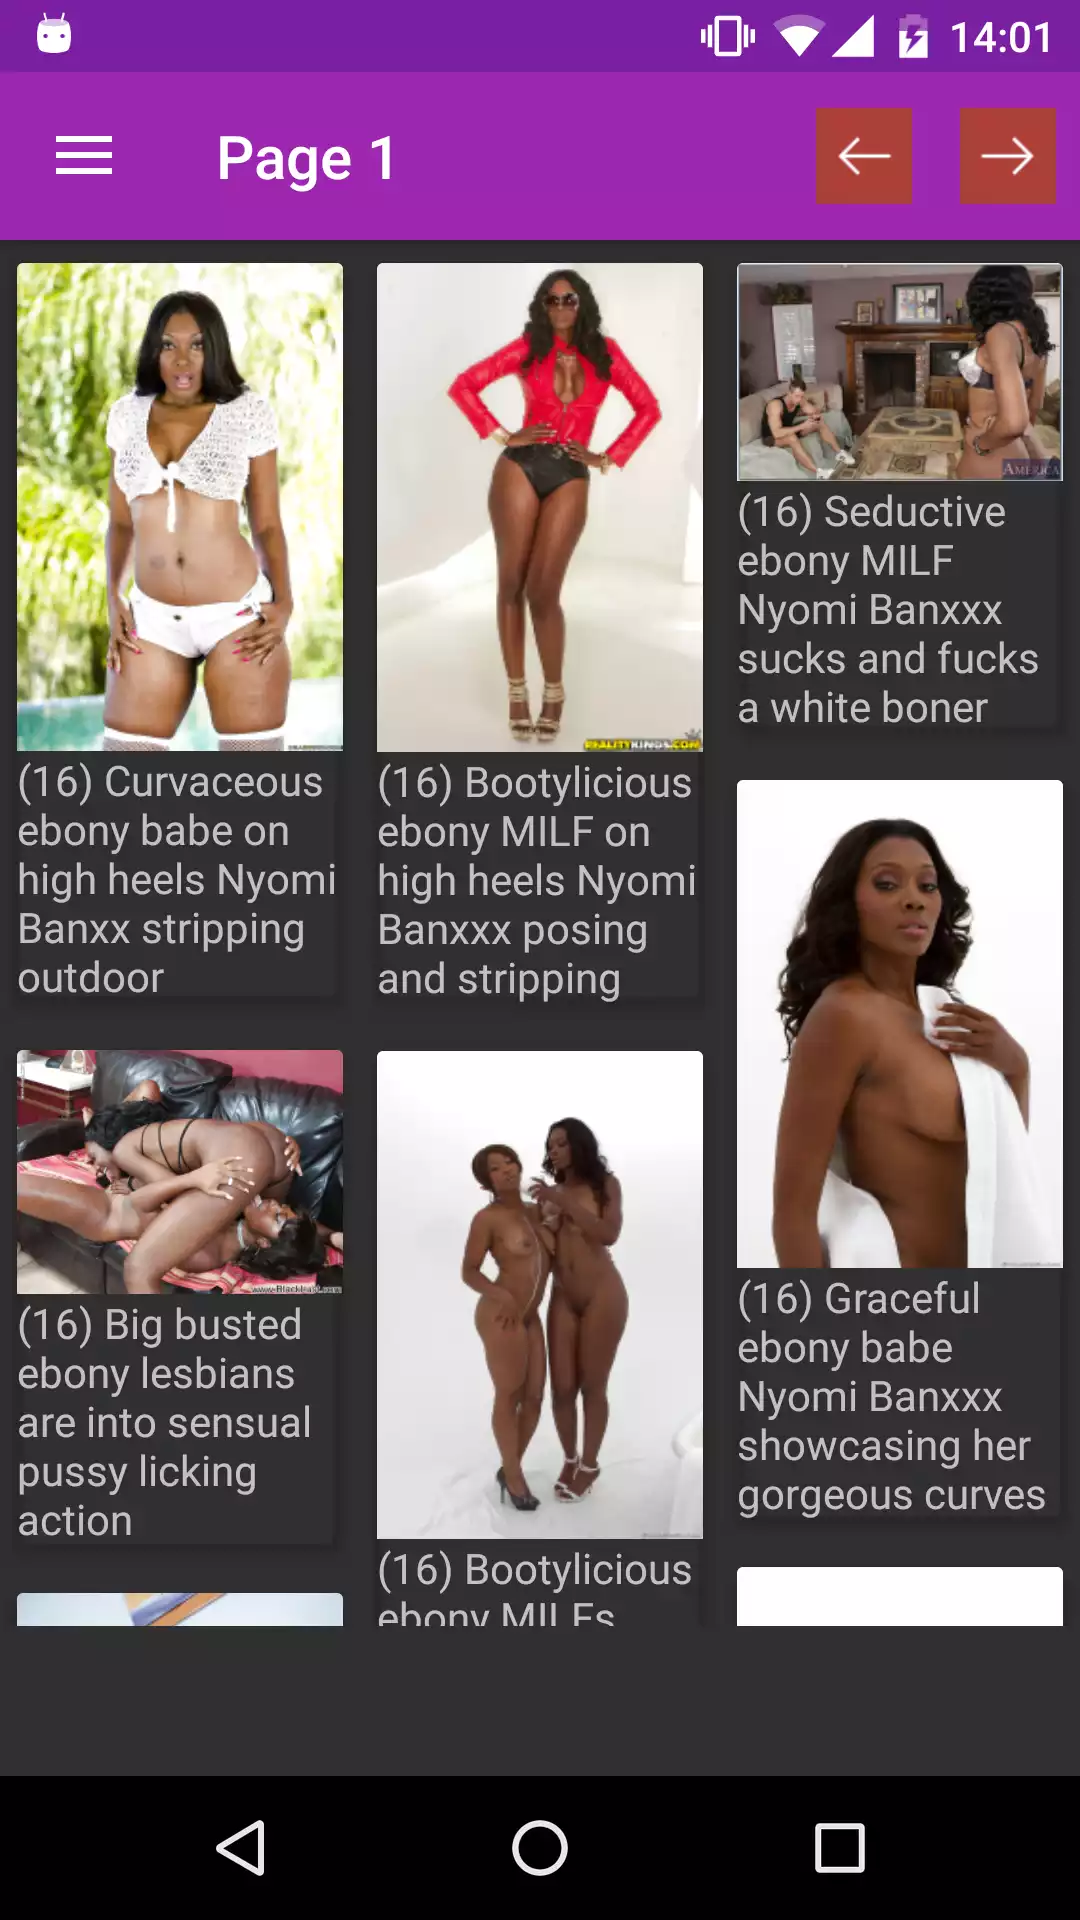 Nyomi Banxxx galleries picd,pics,esperanza,android,app,banxxx,download,blowbang,galleries,pictures,picture,pic,anime,pornstar,ebony,nyomi,erotic,porn,photos,sexy,hentai,downloads,gomez,apps,star,black